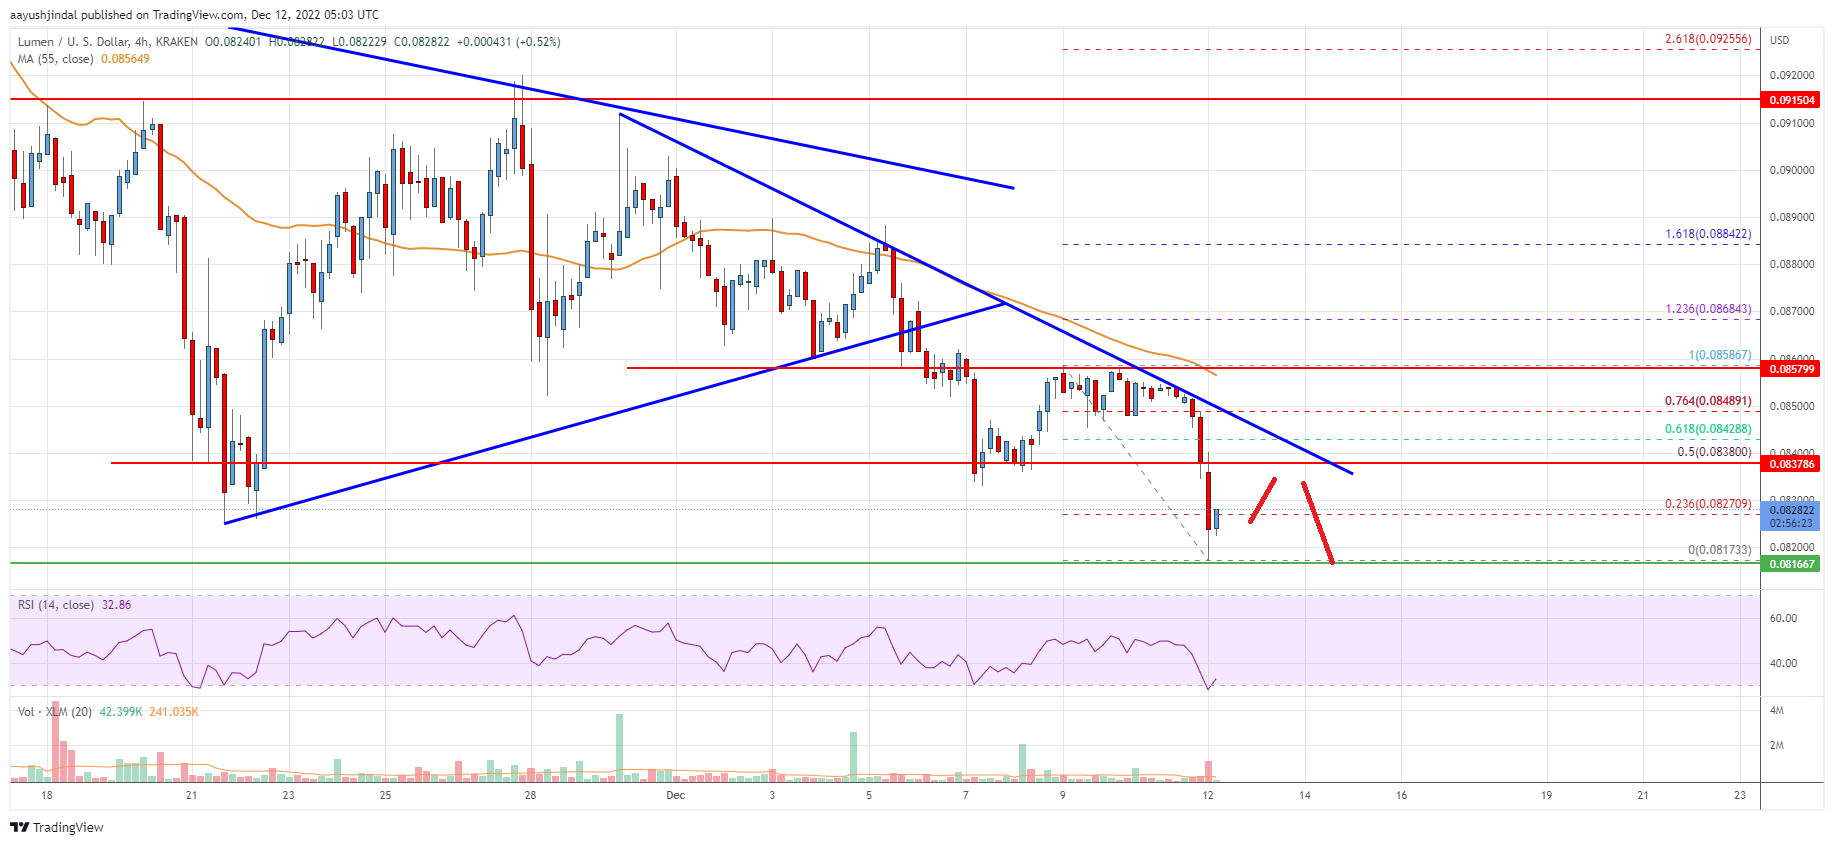 Stellar Lumen (XLM) Price Extends Decline, Why Bears Are In Control